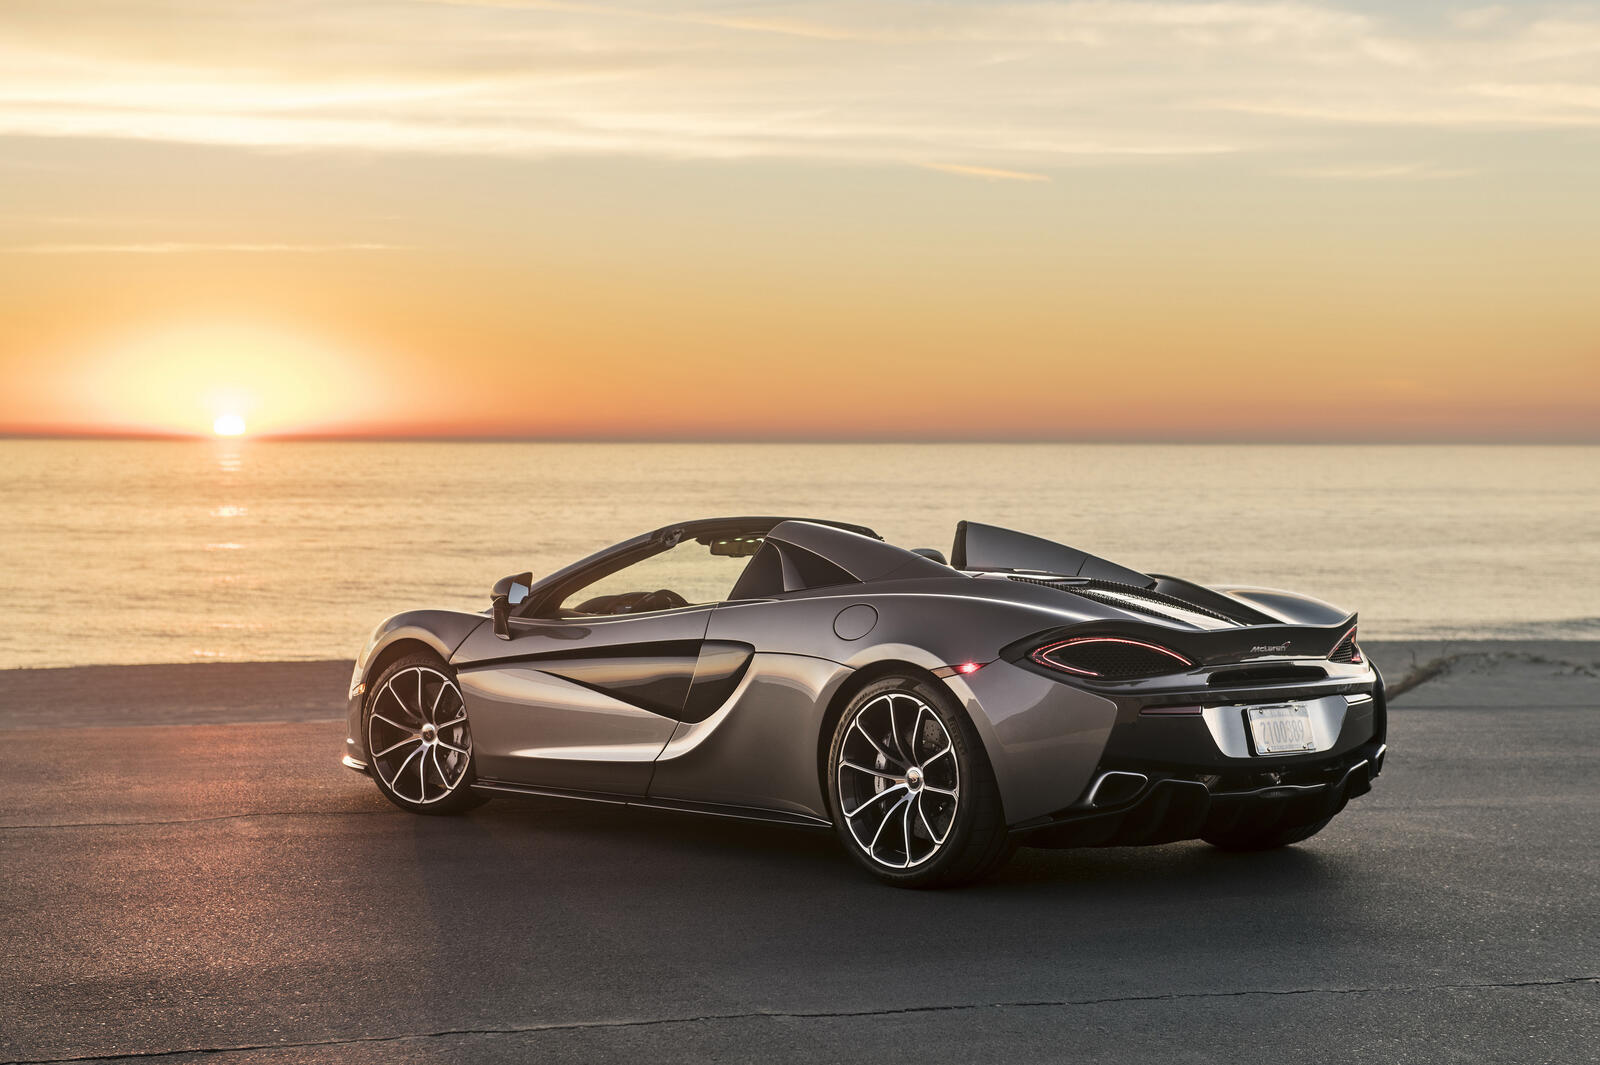 Free photo The Mclaren 570S Spider convertible on the beach at sunset